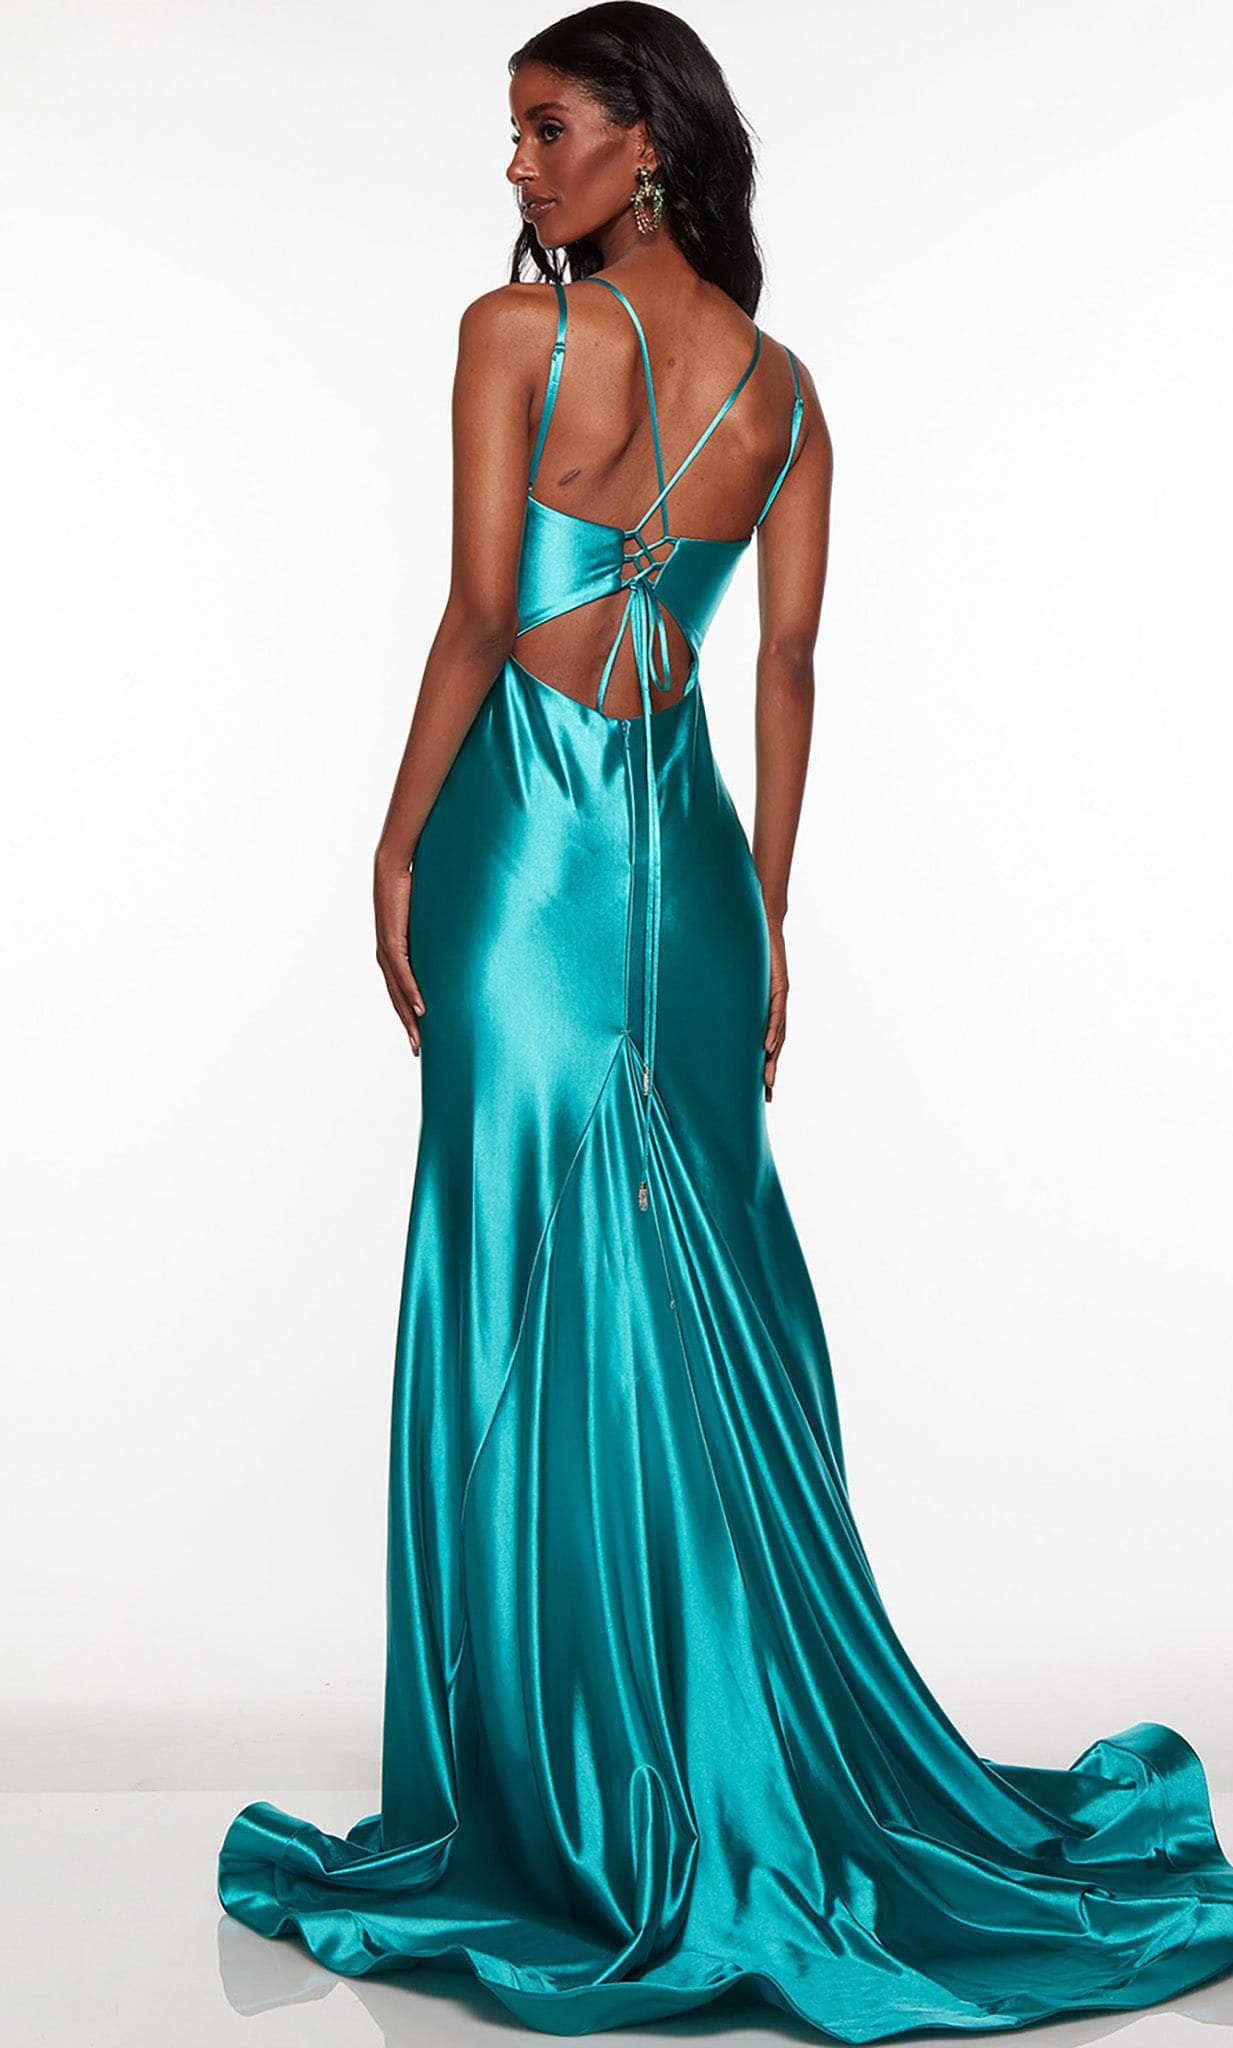 Alyce Paris 61436 - Lace-Up Back Mermaid Prom Gown Special Occasion Dresses